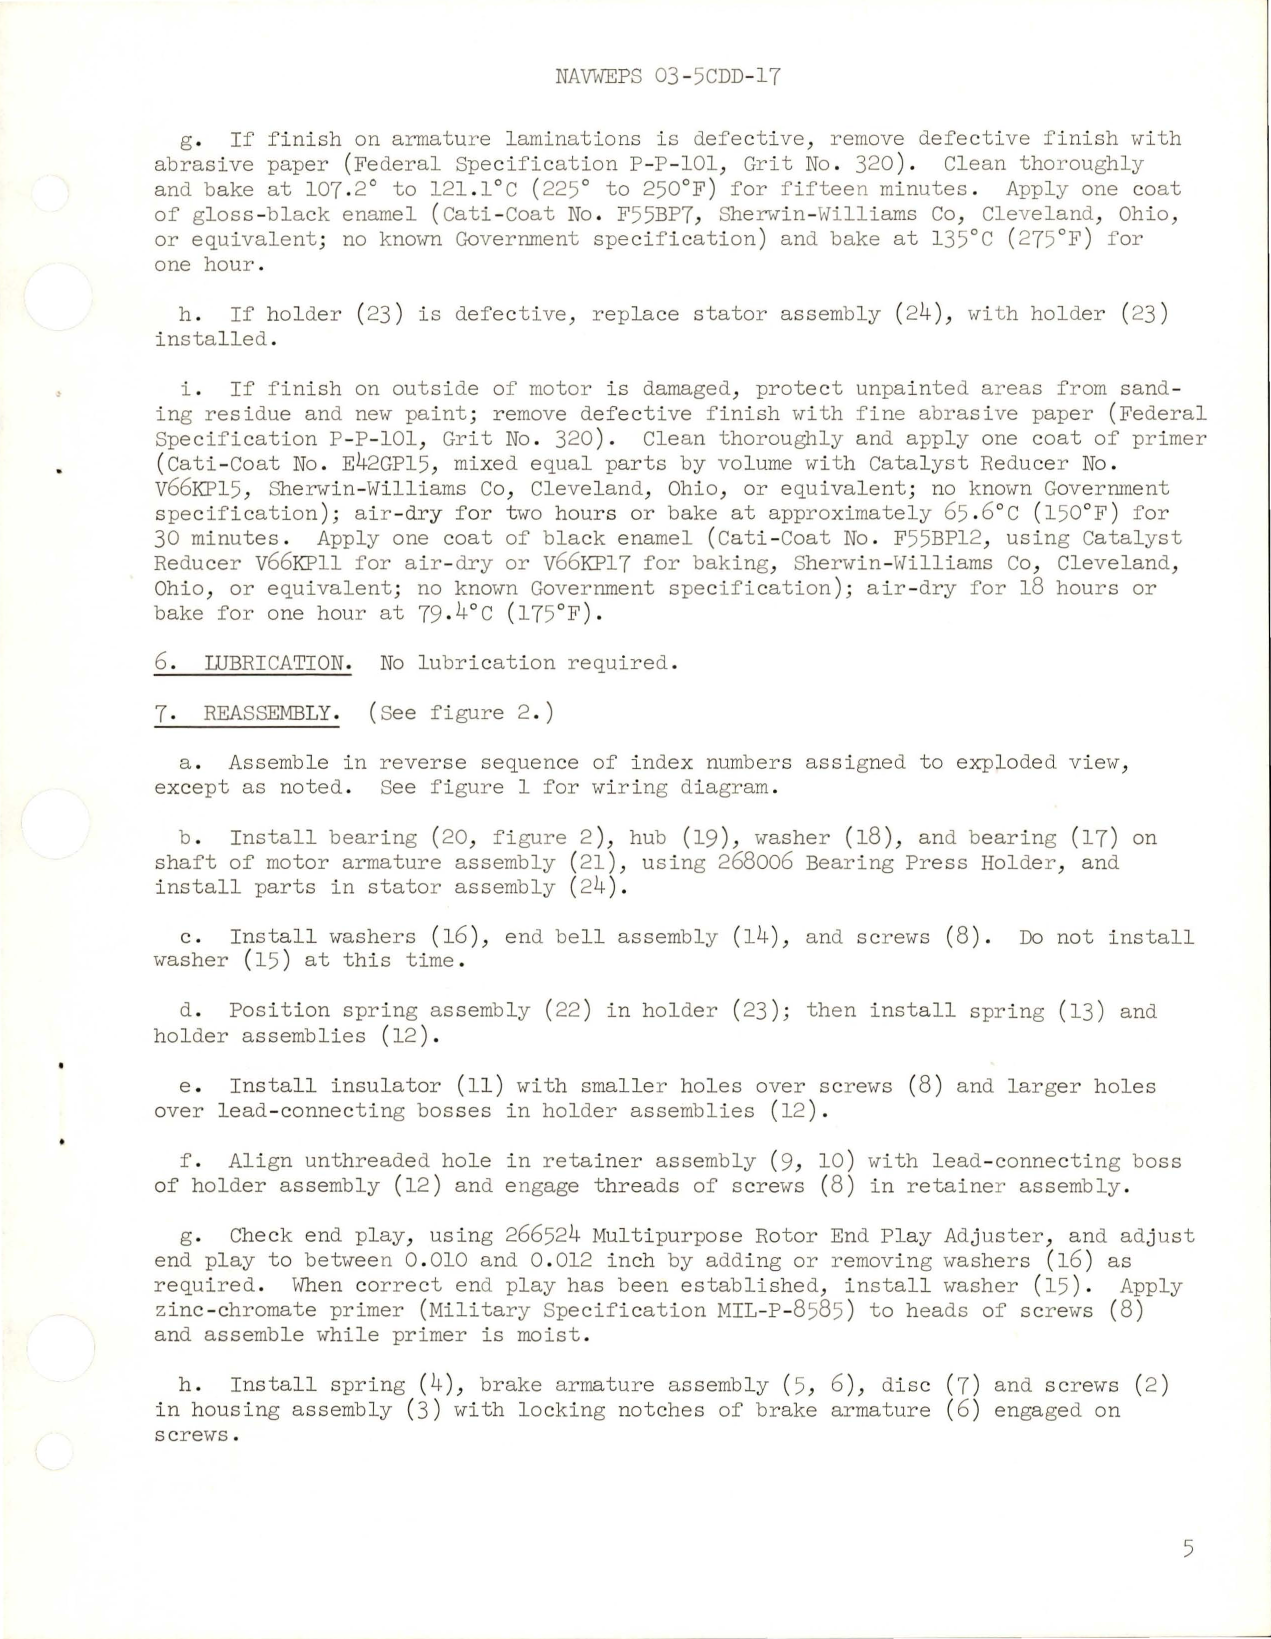 Sample page 5 from AirCorps Library document: Overhaul Instructions with Parts Breakdown for Direct Current Motor - Part 36843-2-1